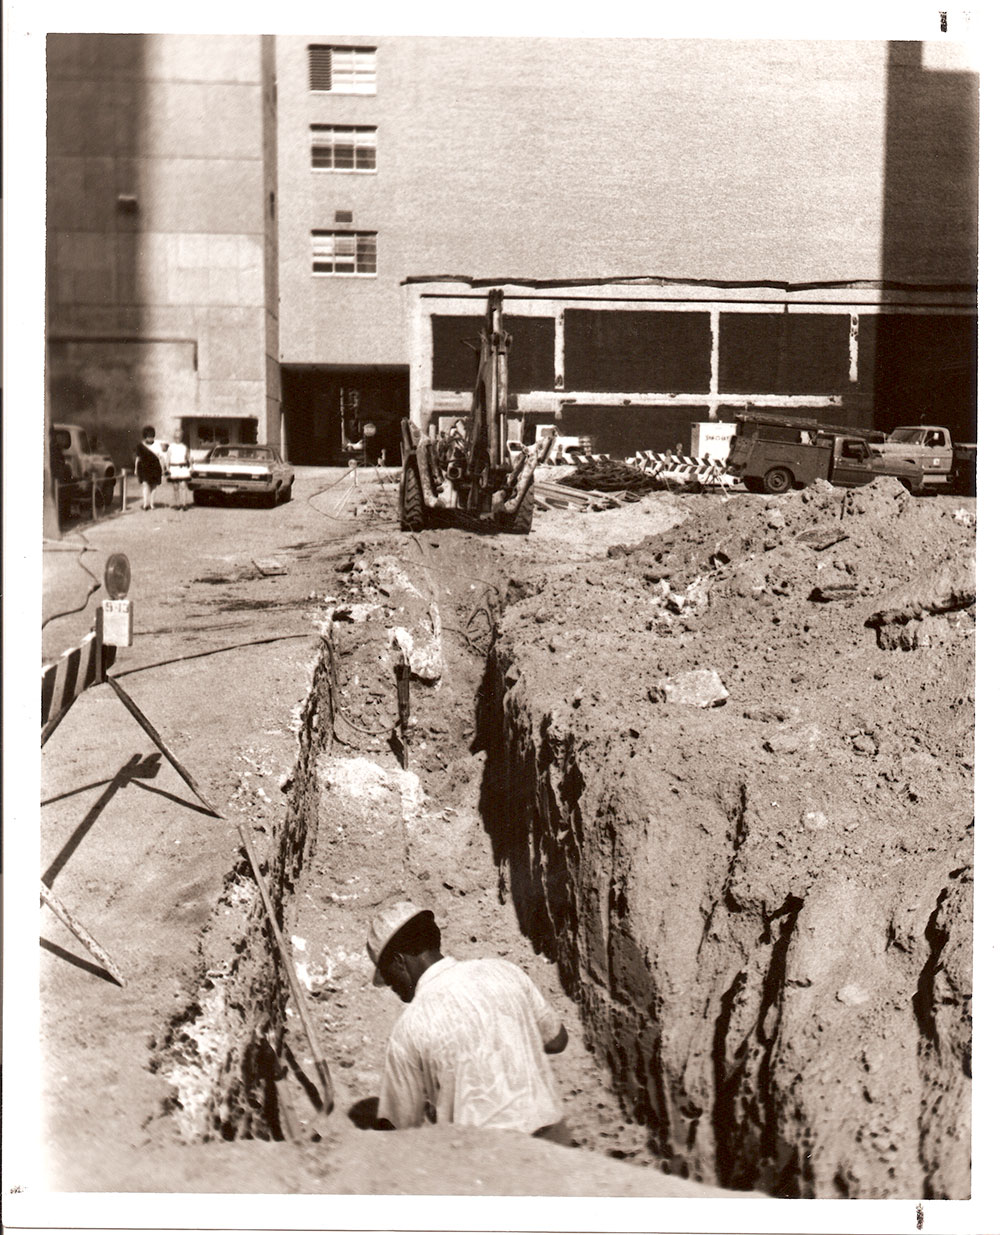 (FNB.2010.3.35) - Excavation for First national Center Construction, Possibly Site of Former Auto Hotel, c. 1972